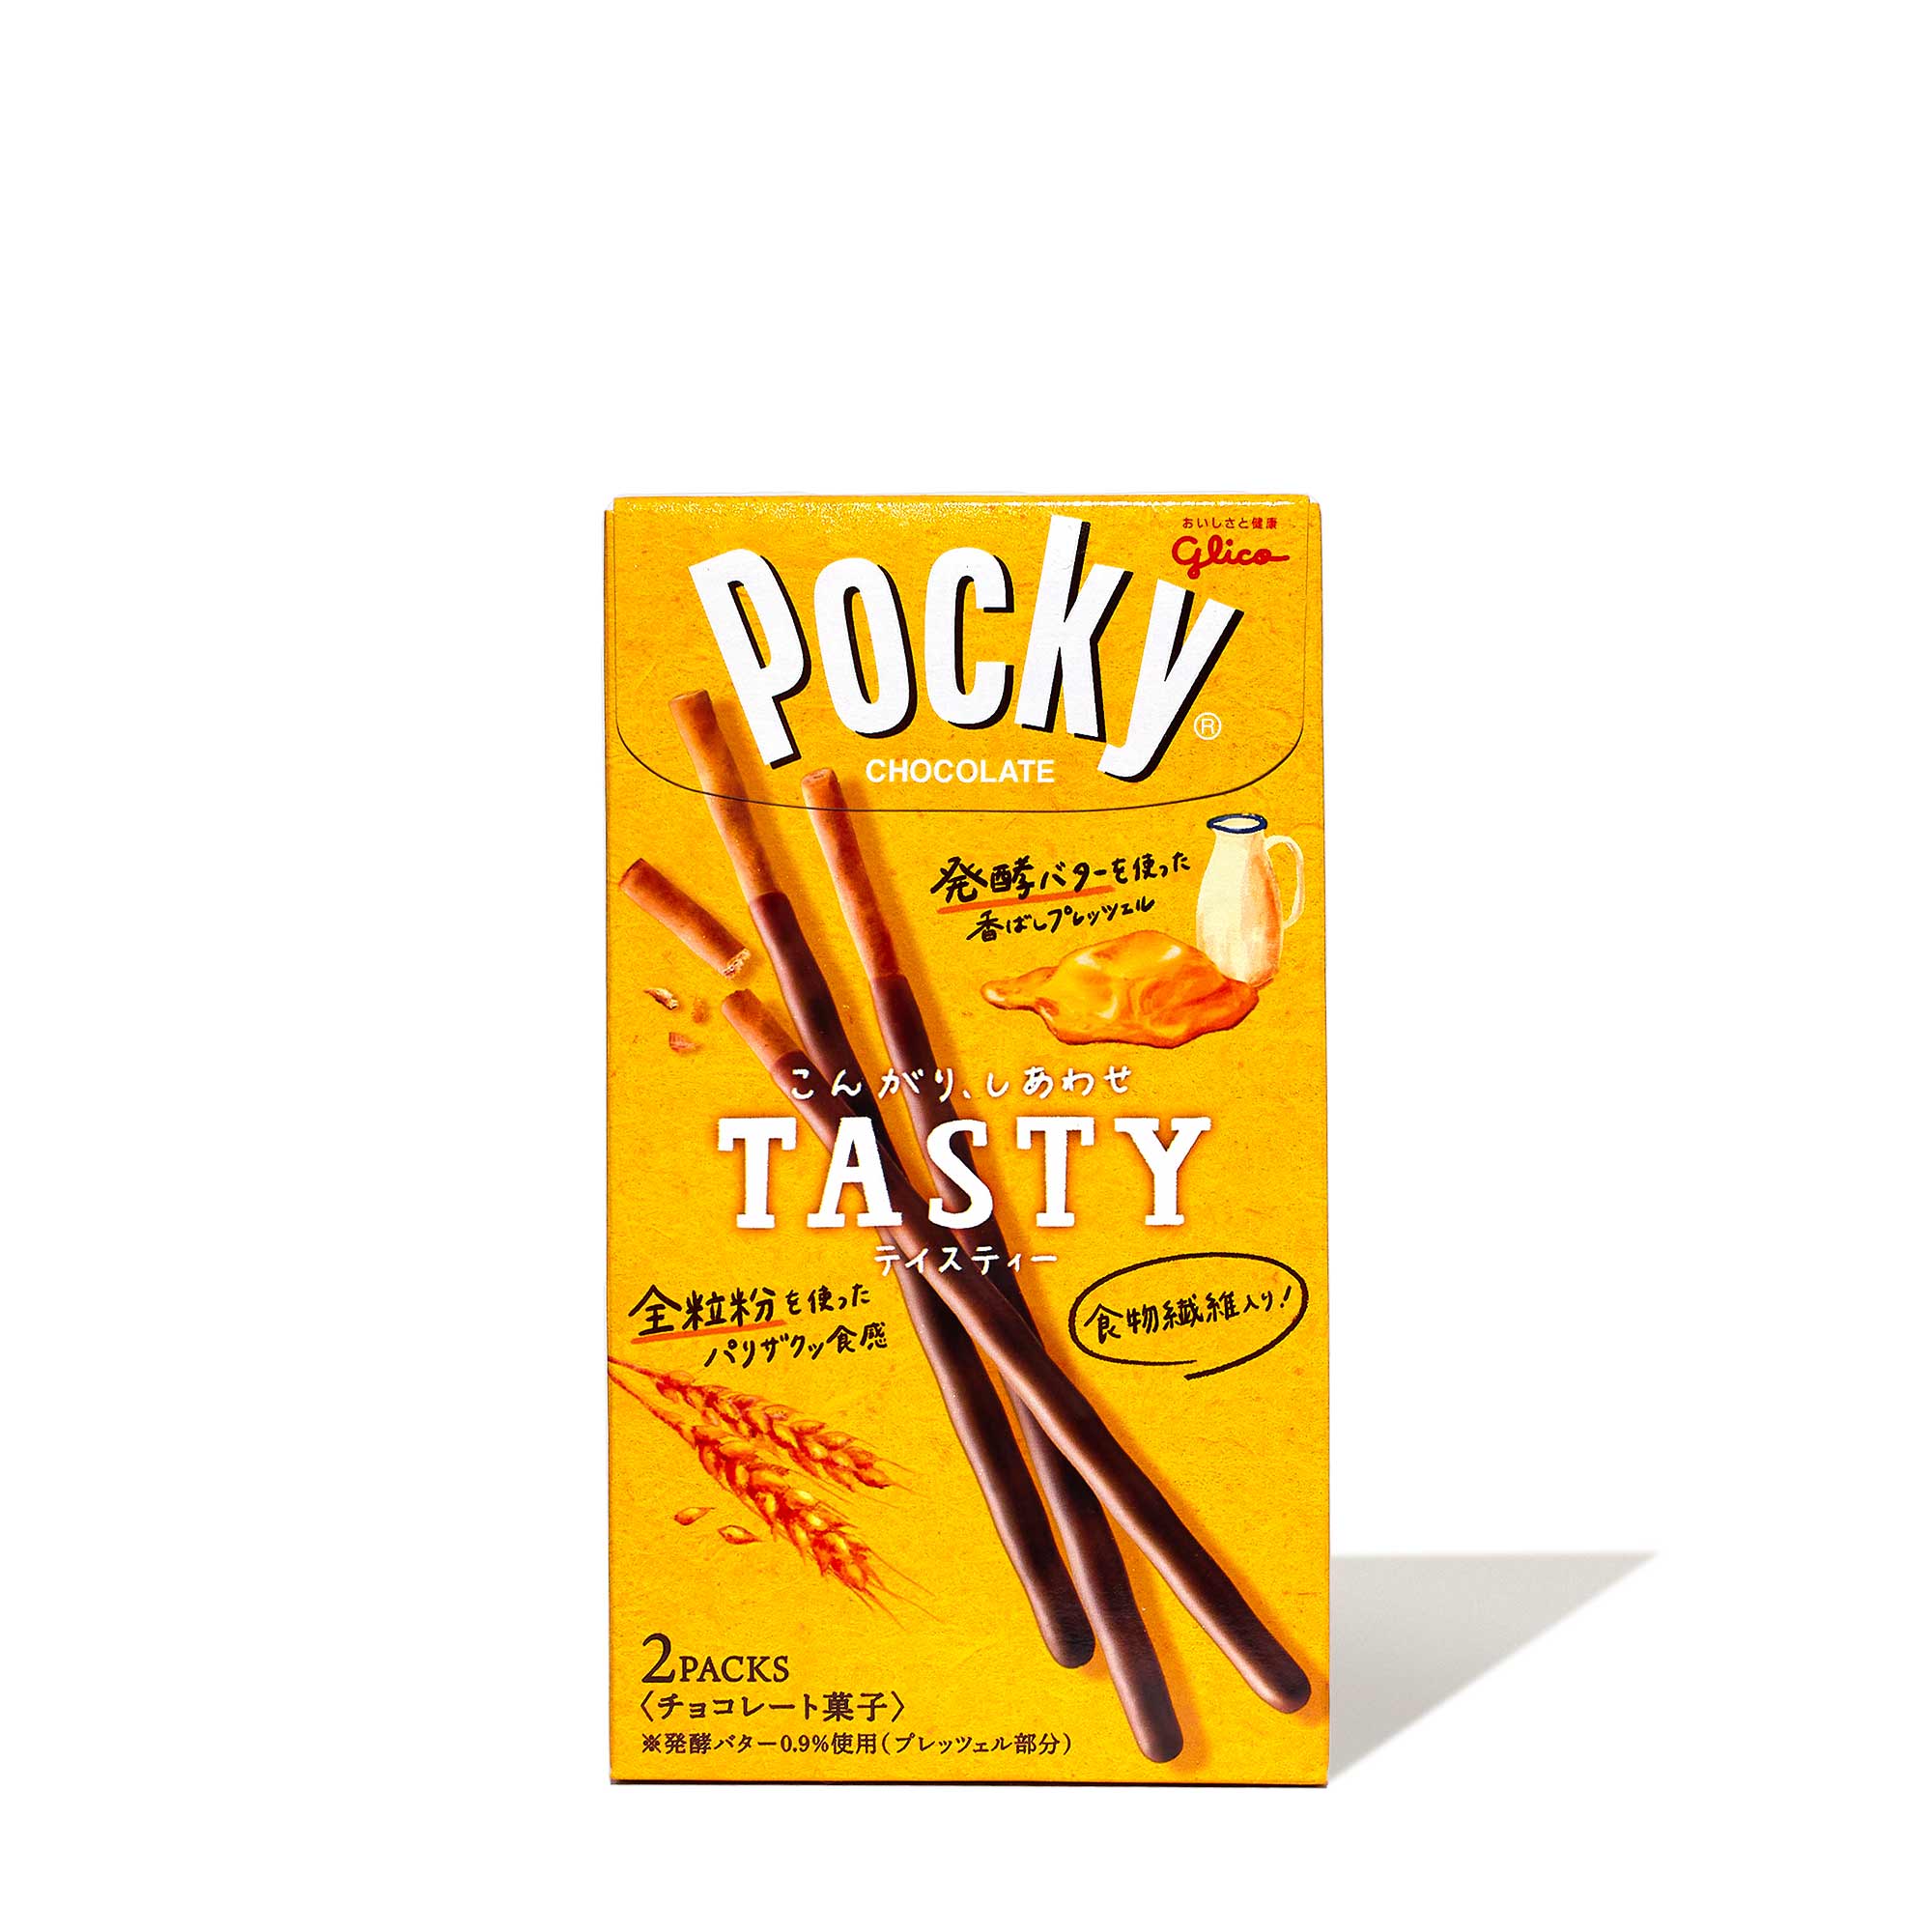 Glico Pocky Biscuit Chocolate Sticks Japanese Snack - 16 different